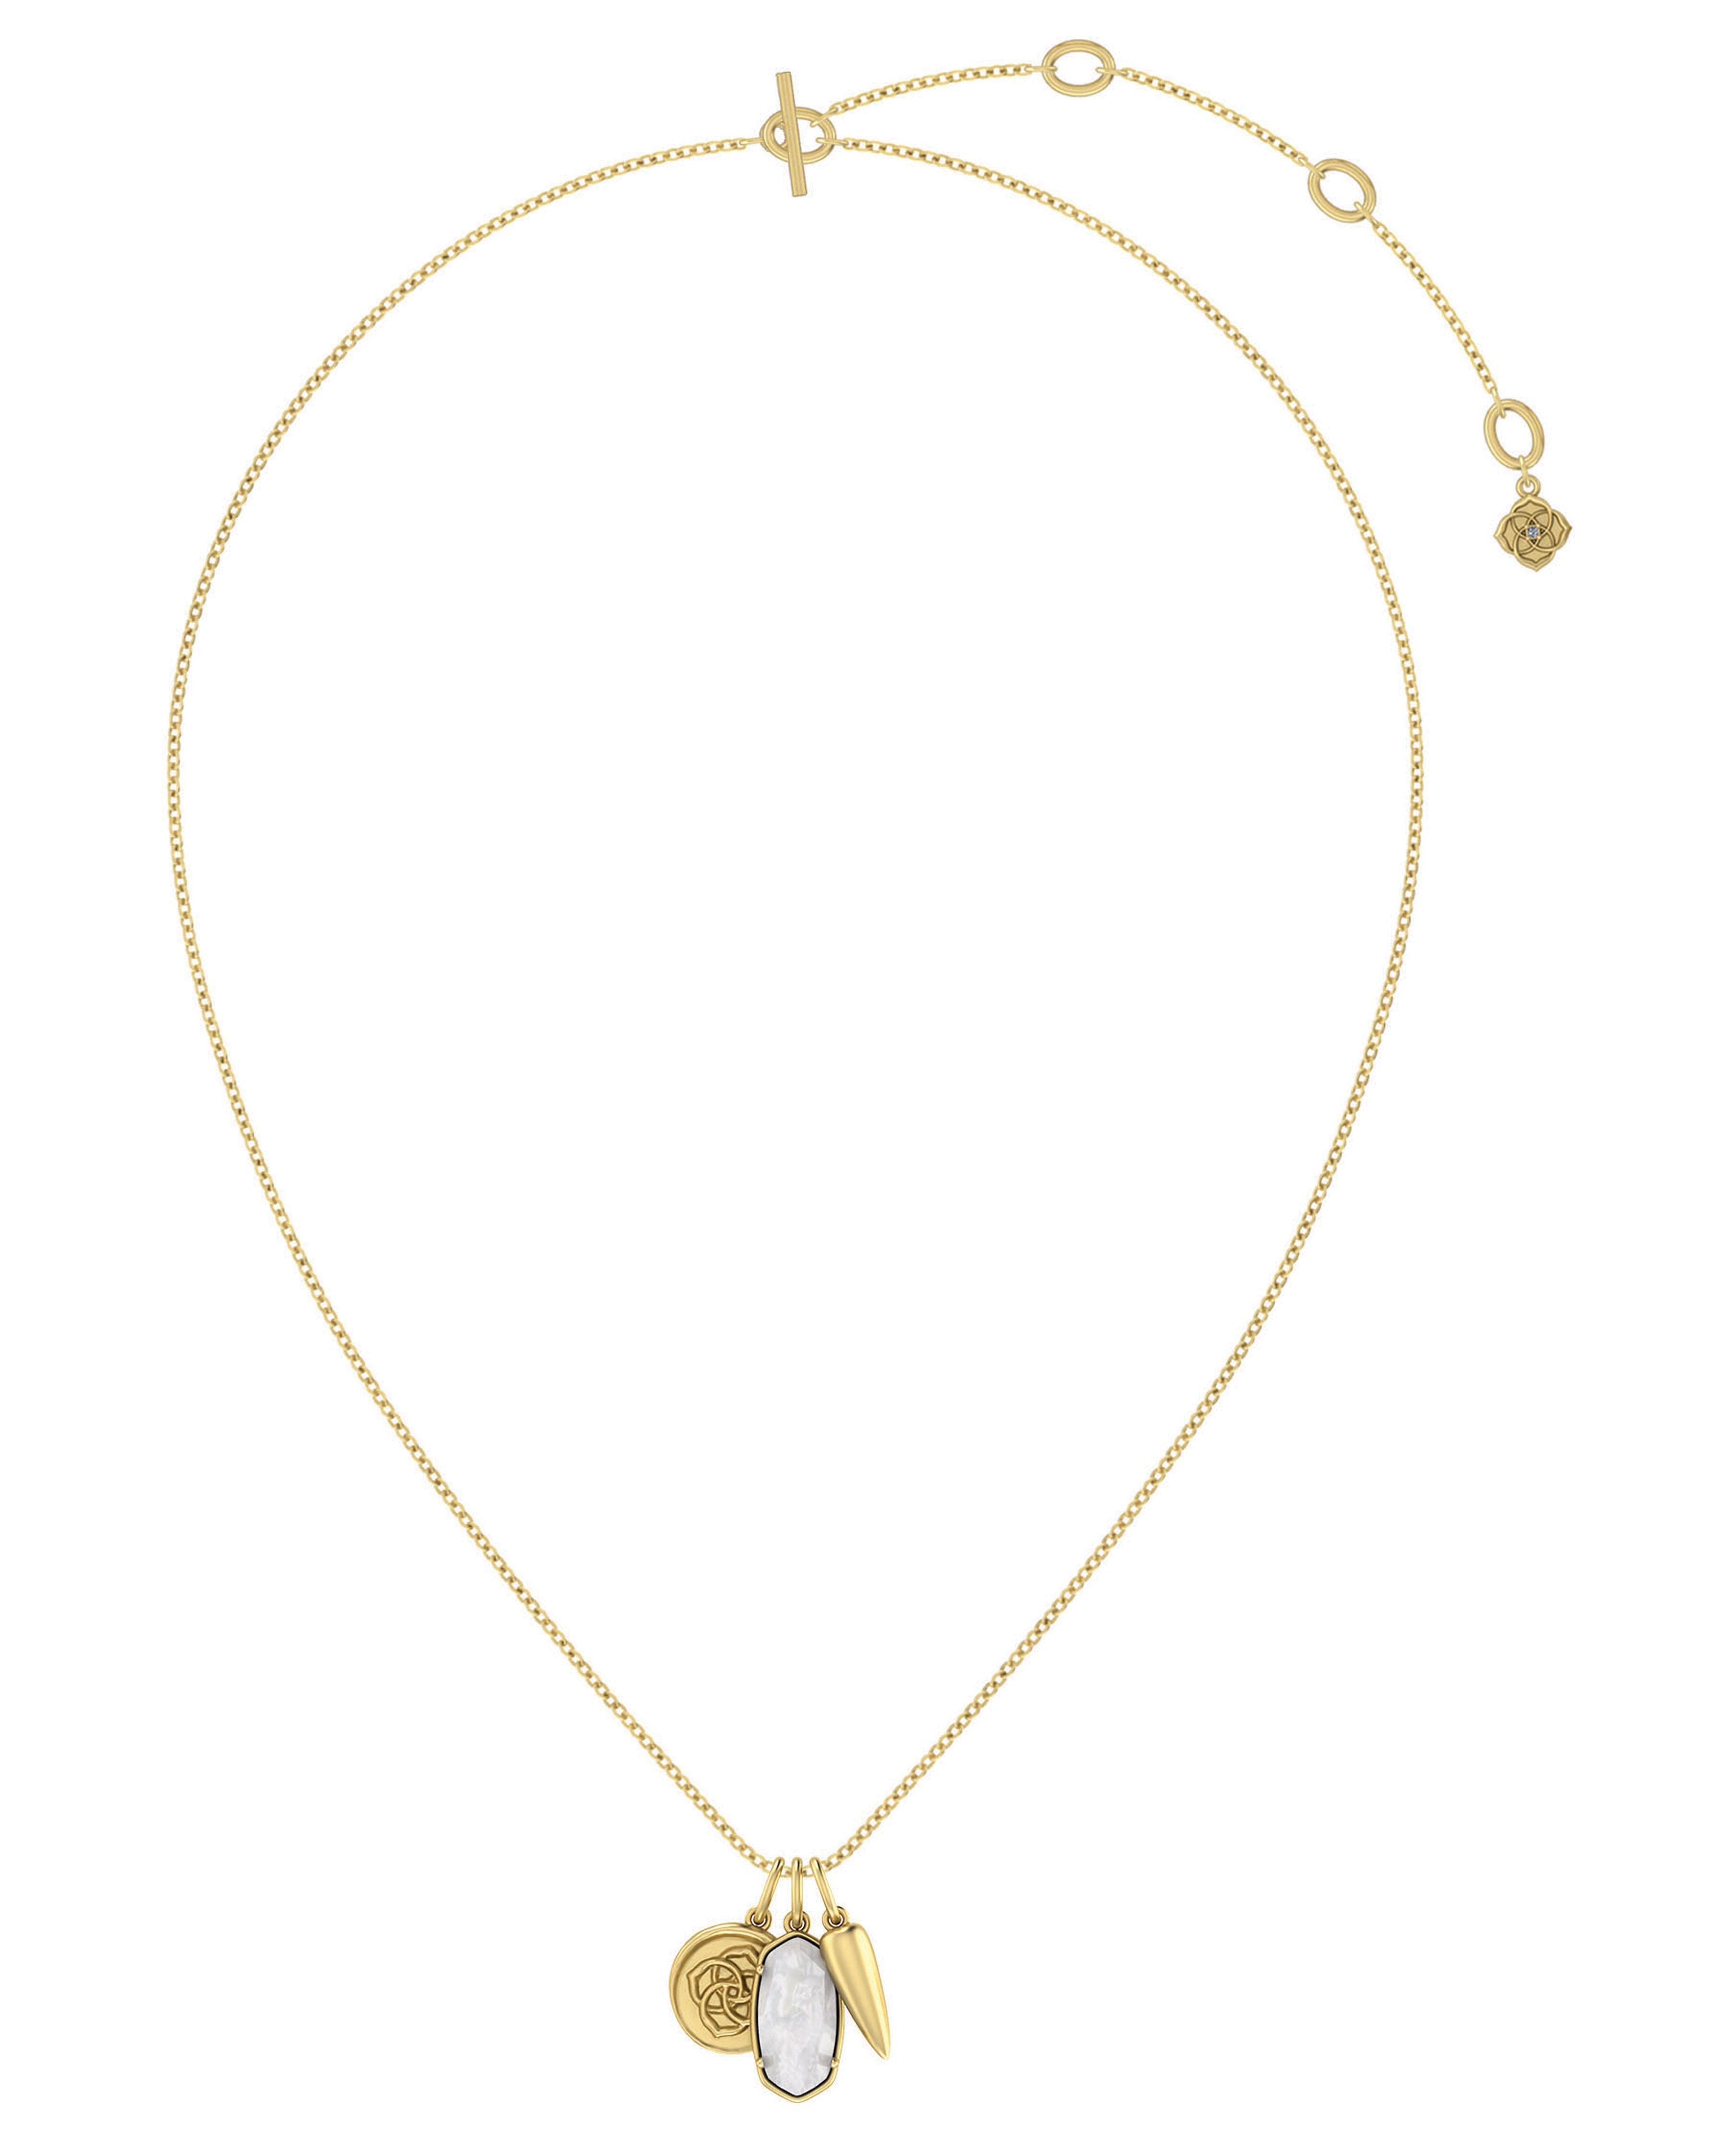 Kendra Scott Dira Coin Charm Necklace Gold - Ivory Mother Of Pearl